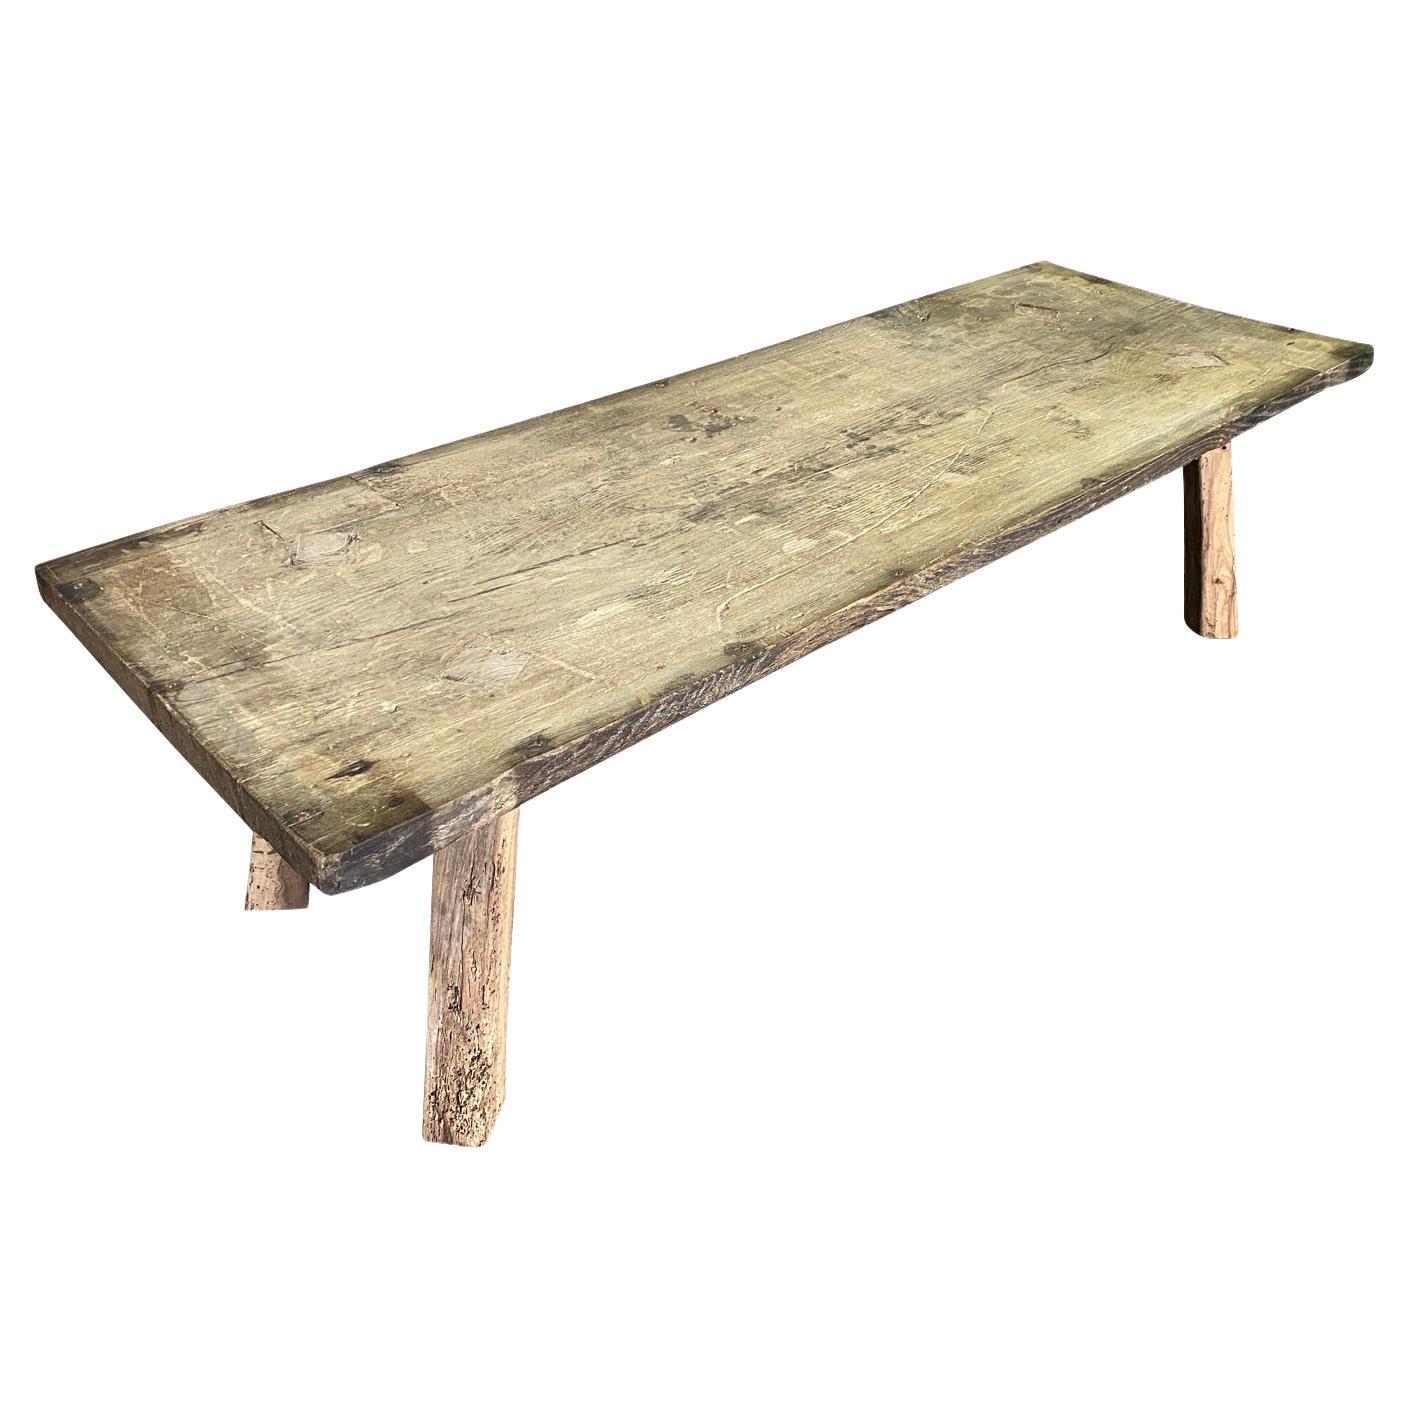 Spanish Table Basse - Coffee Table For Sale